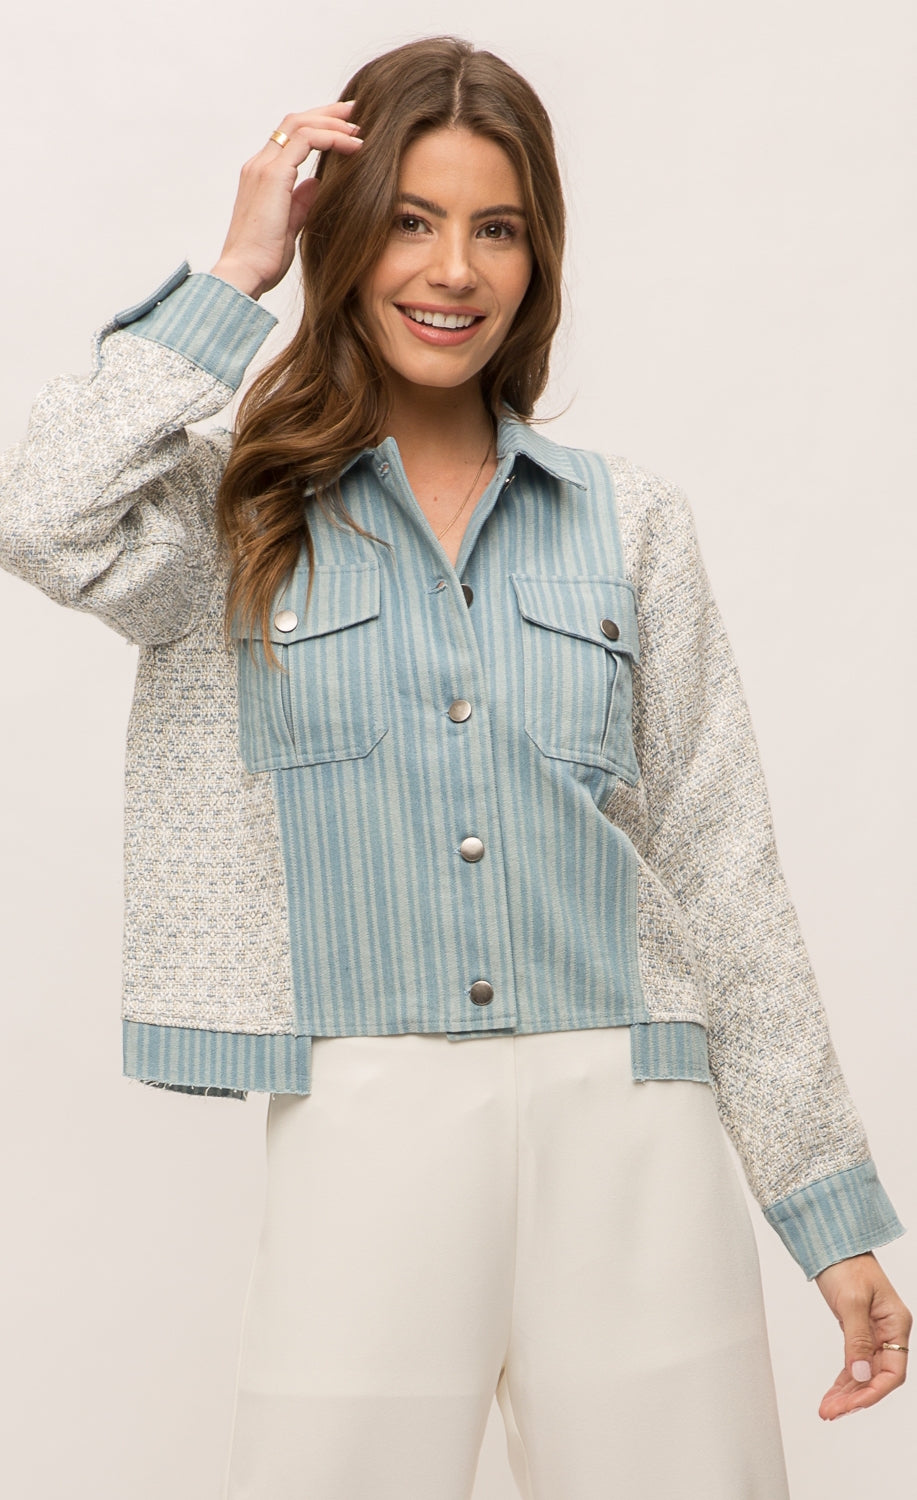 Front top half view of a woman wearing the Mystree Mixed Media Jean Jacket closed with an off-white pant. This jacket has a striped denim body with woven grey and blue sleeves and sides. The front has two patch breast pockets and a button up front. 